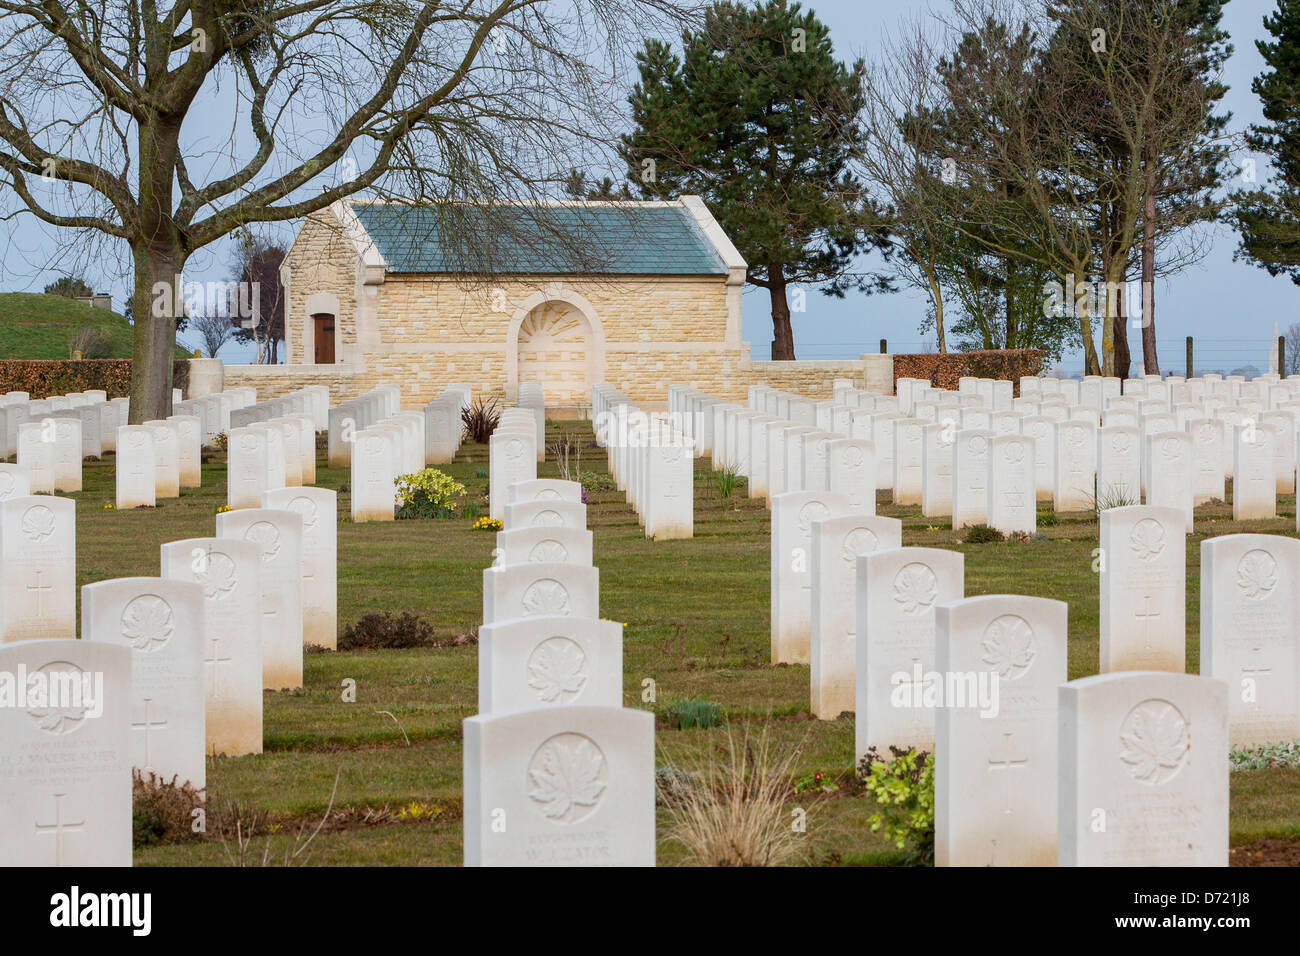 Canadian cemetery of second war (1939-1945) in Beny-sur-mer, Normandy, France Stock Photo